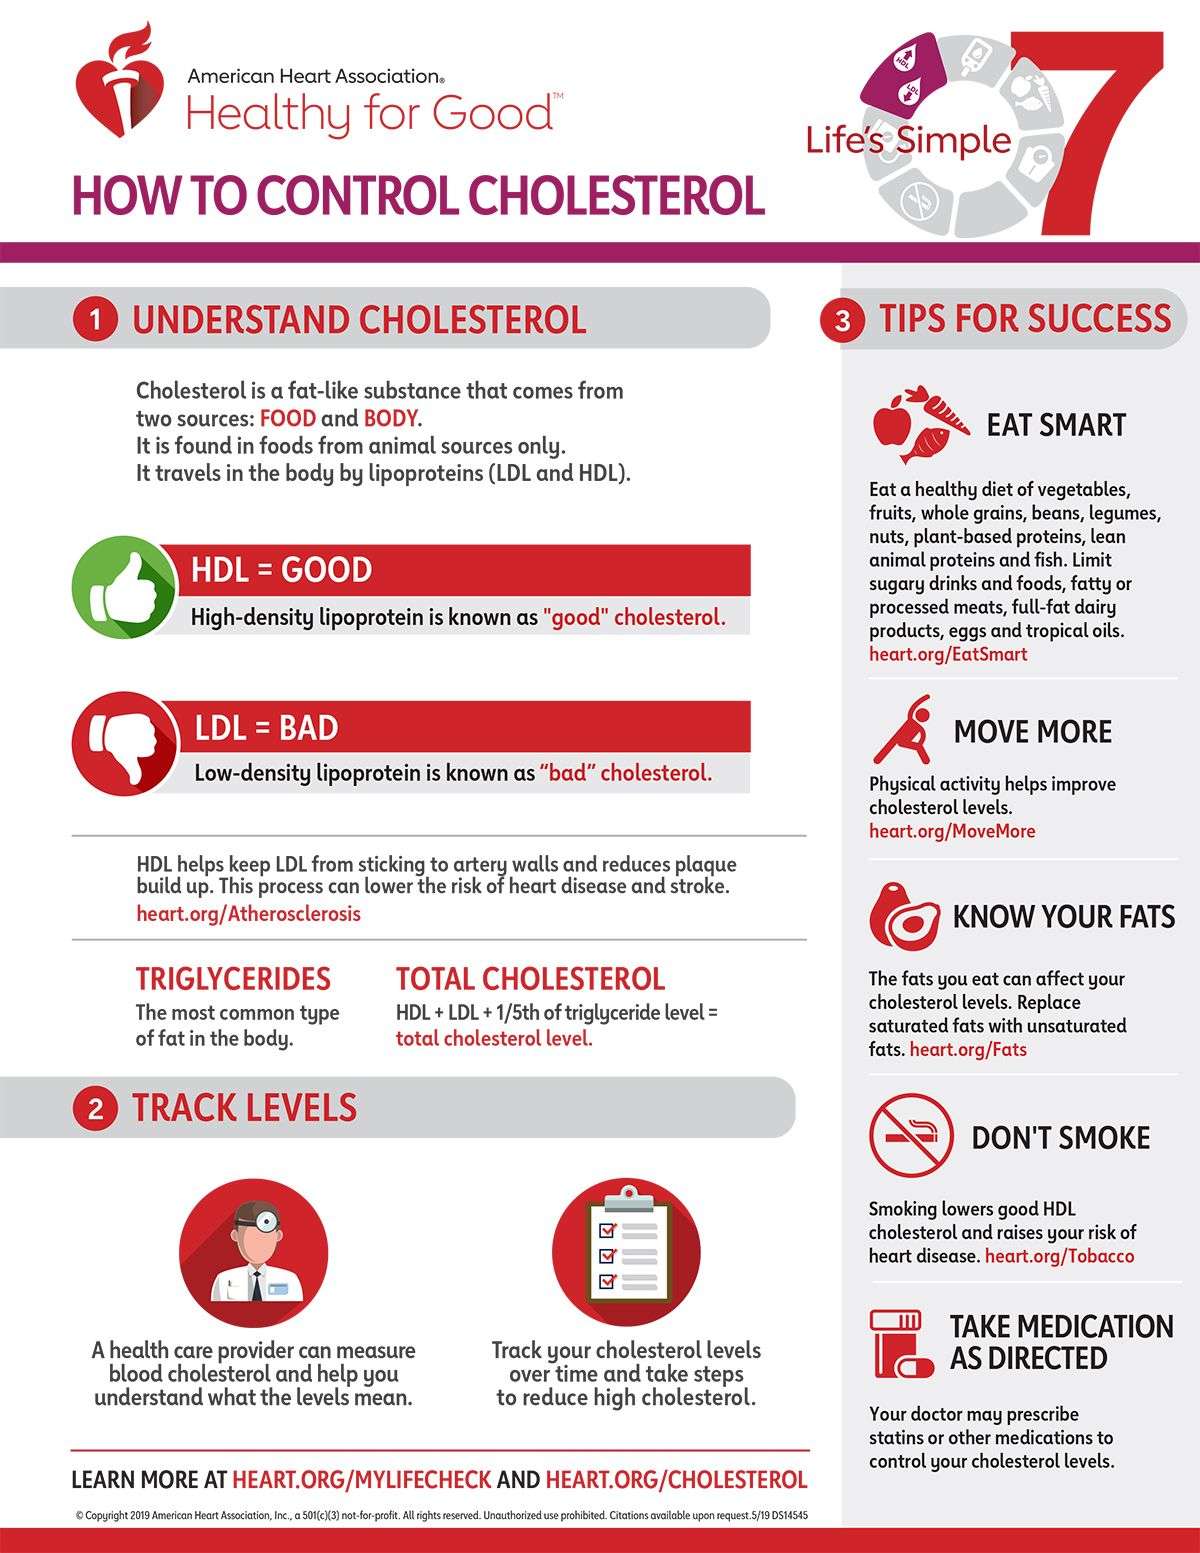 High cholesterol contributes to plaque, which can clog arteries and ...